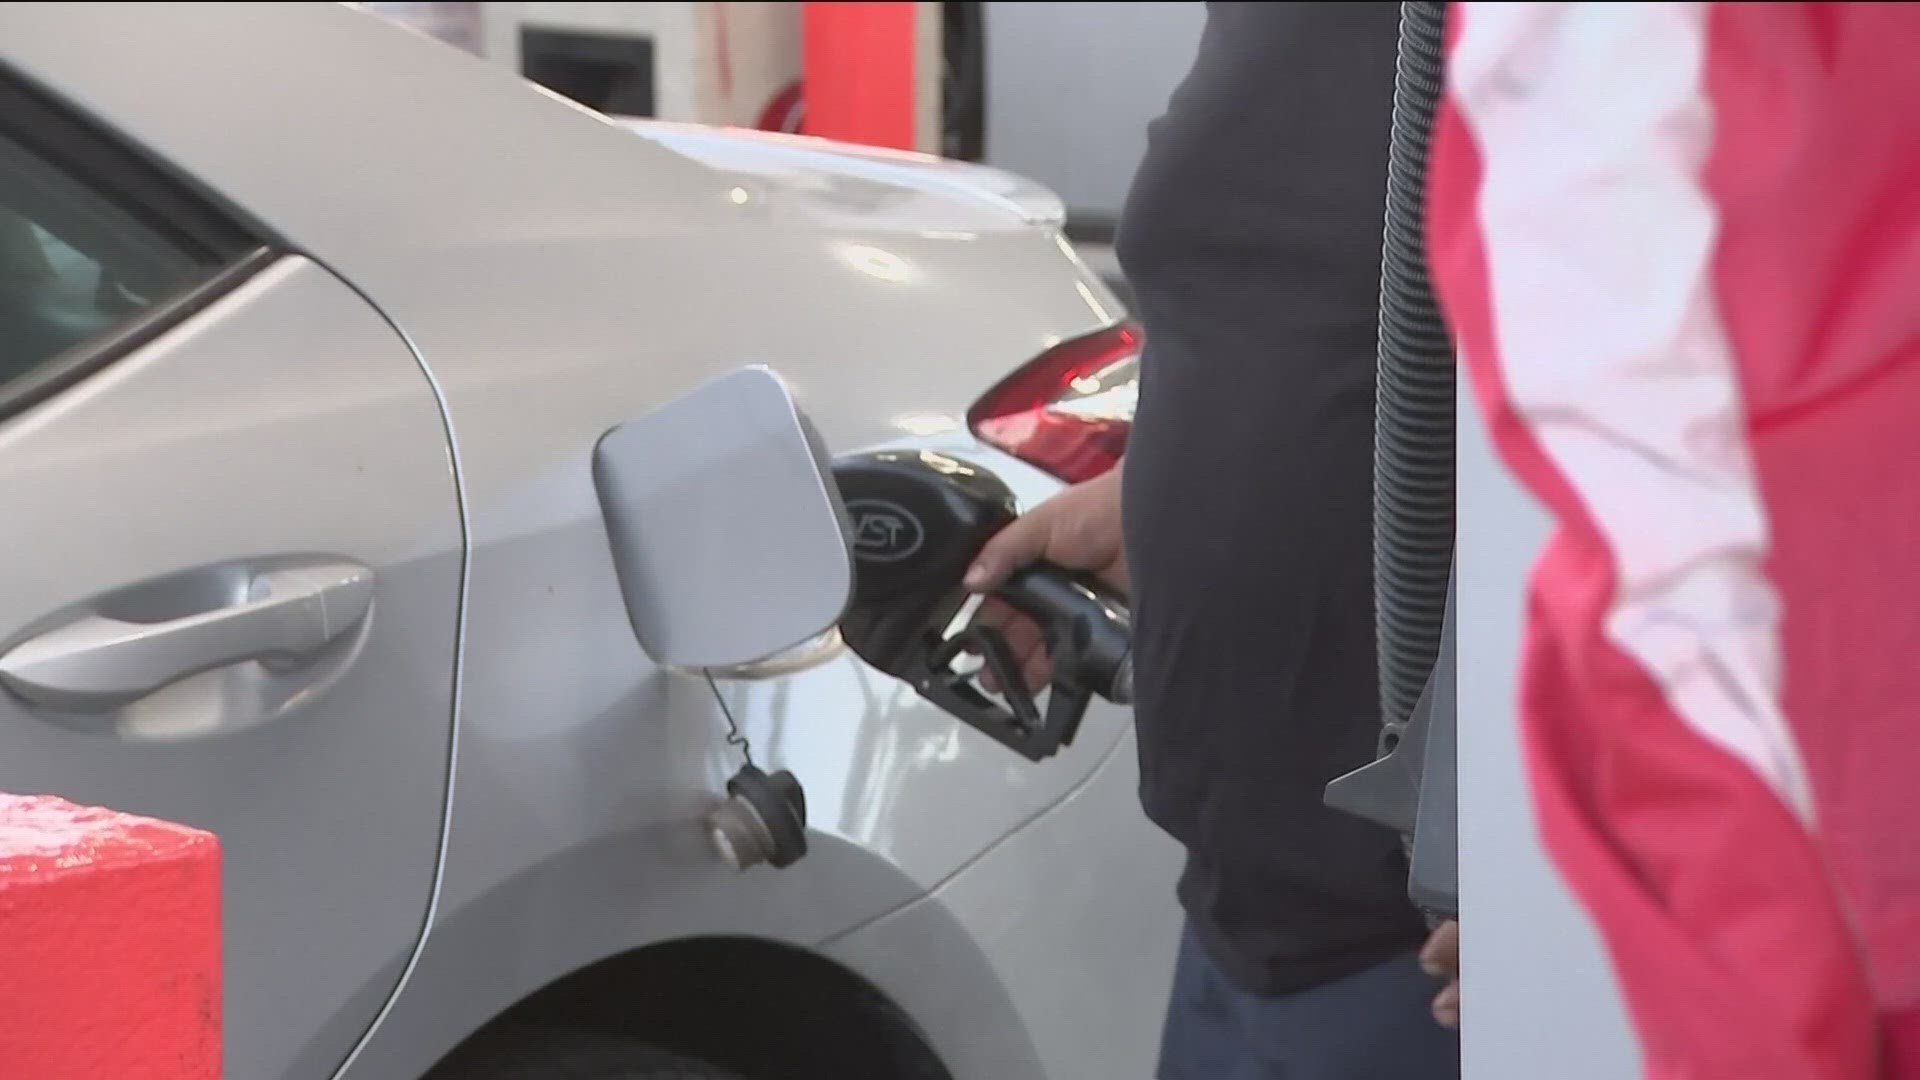 They report that the new average price for a gallon of gas is $3.51, just two cents below the national average.